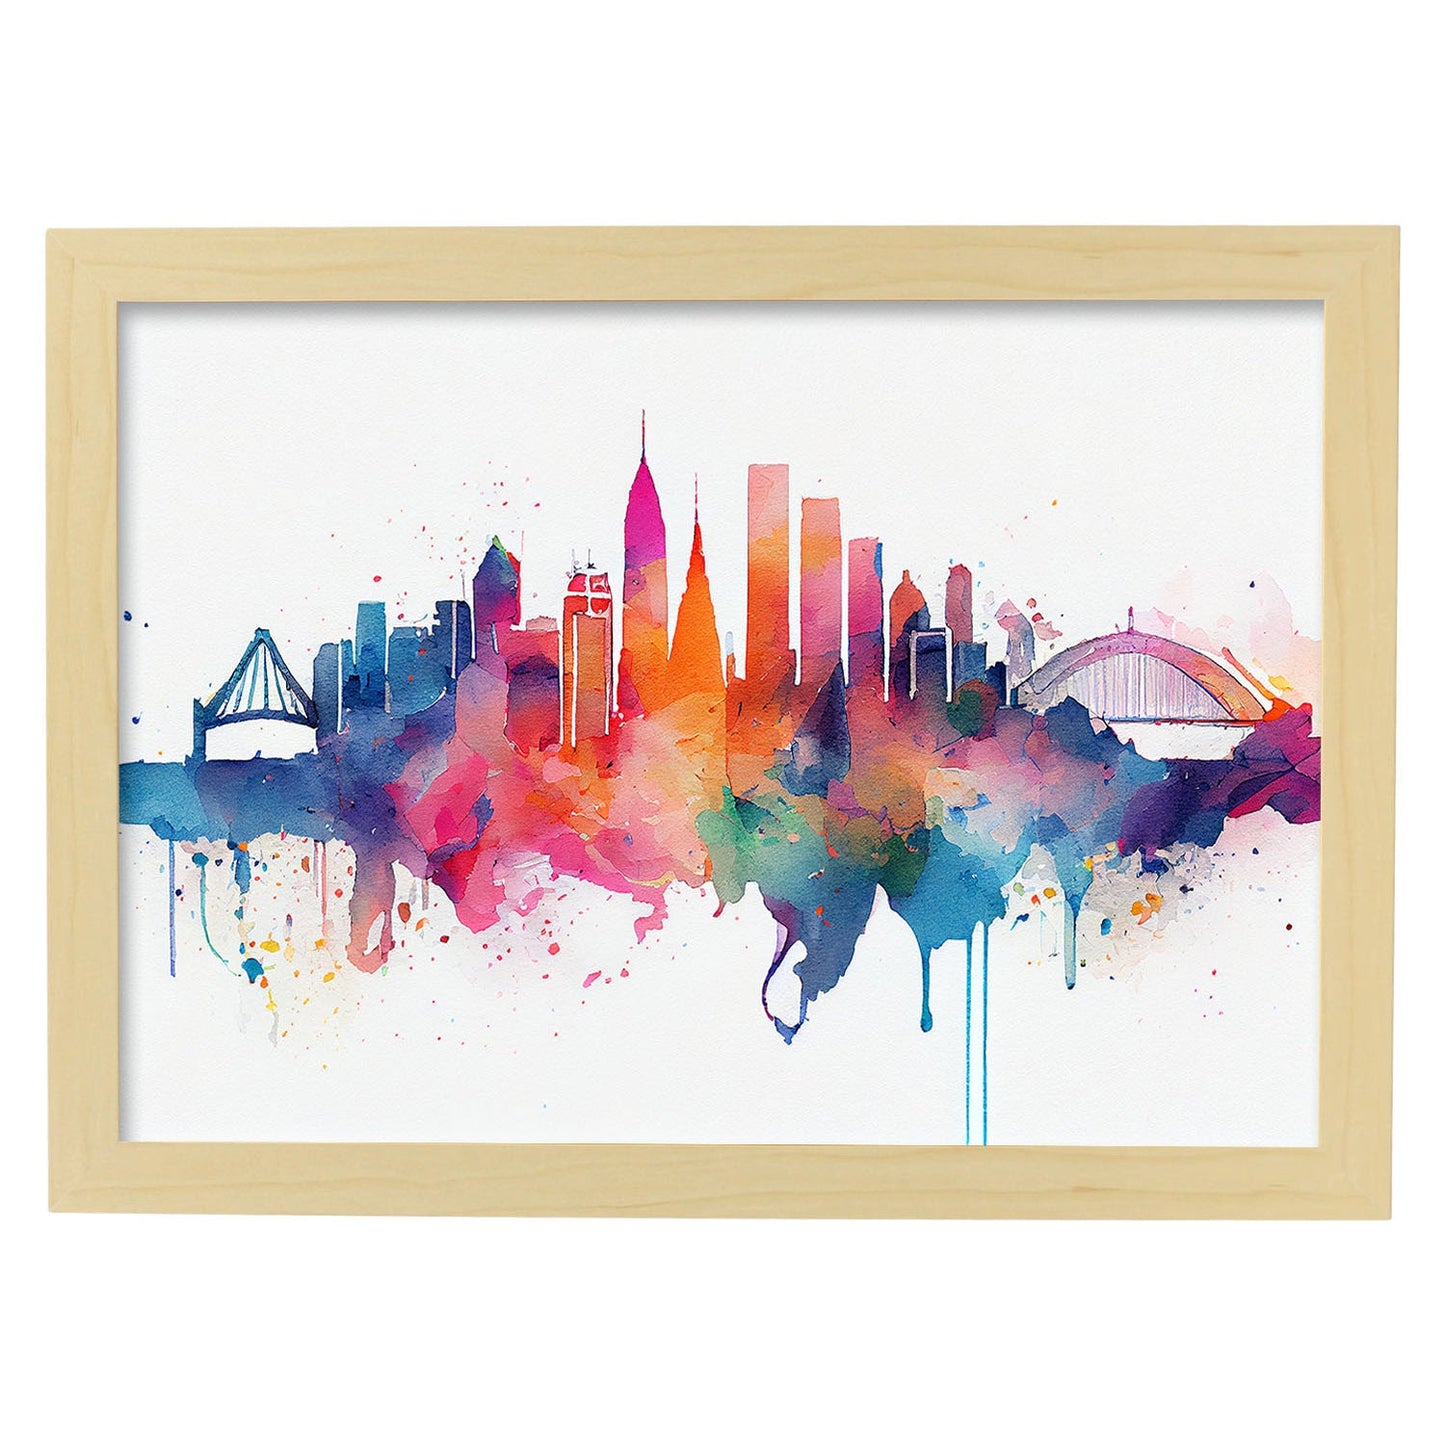 Nacnic watercolor of a skyline of the city of Sydney_1. Aesthetic Wall Art Prints for Bedroom or Living Room Design.-Artwork-Nacnic-A4-Marco Madera Clara-Nacnic Estudio SL